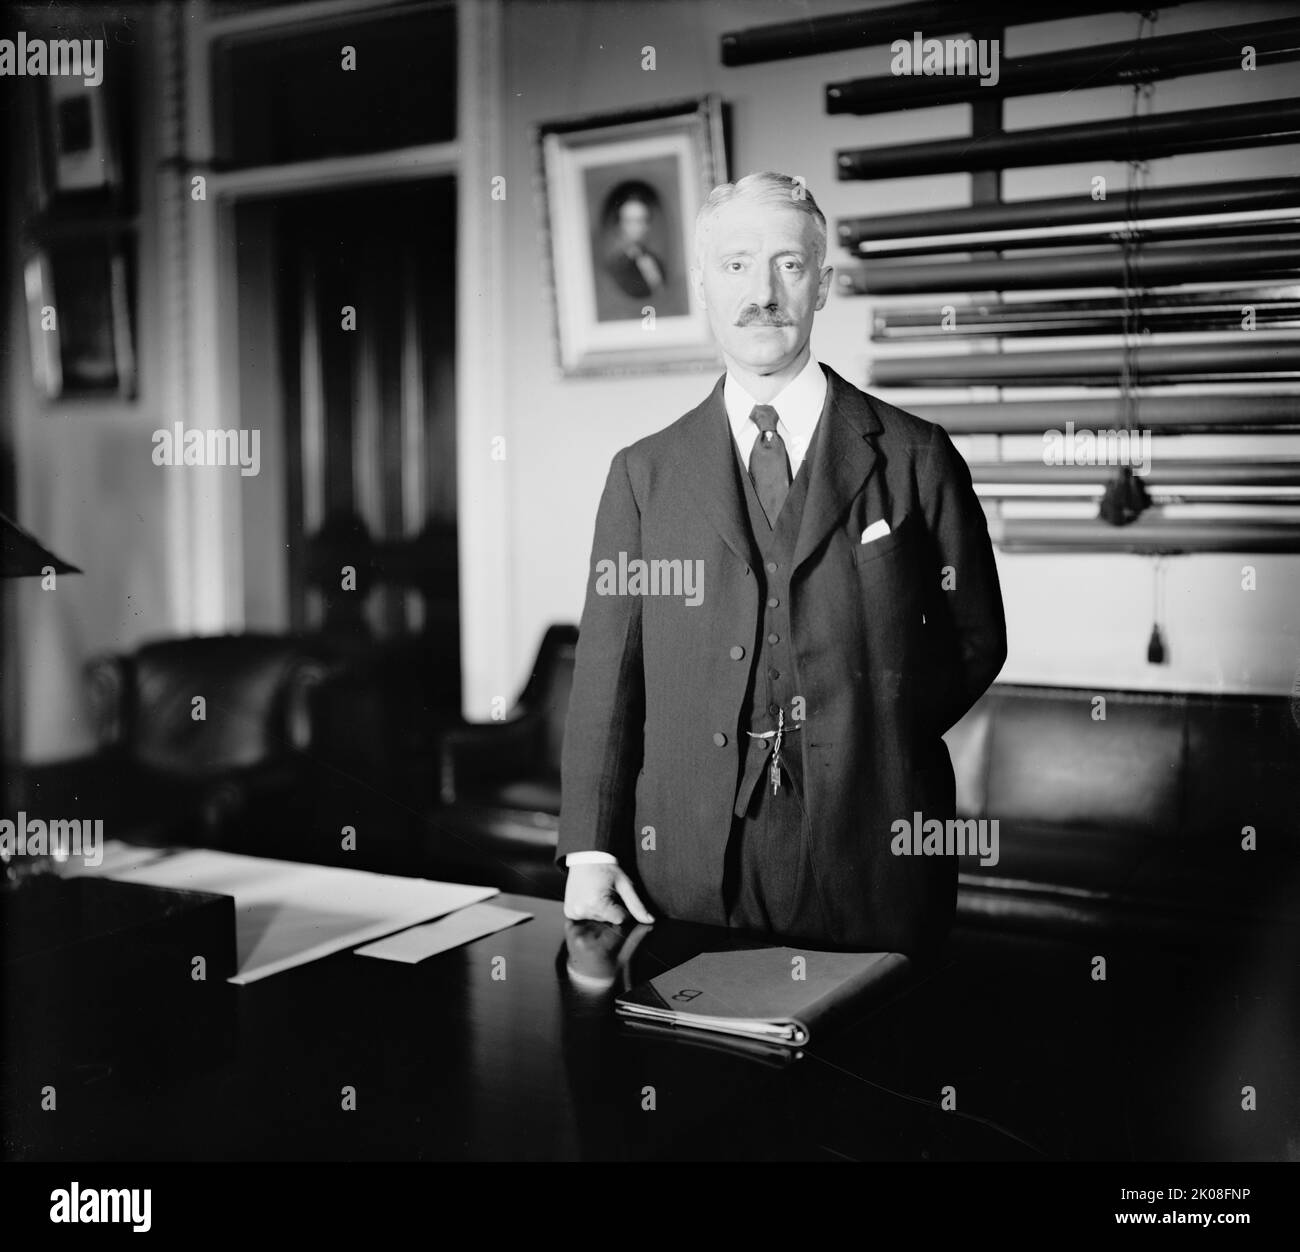 Bainbridge Colby, between 1910 and 1920. [American politician and attorney: Secretary of State, co-founded the National Progressive Party]. Stock Photo